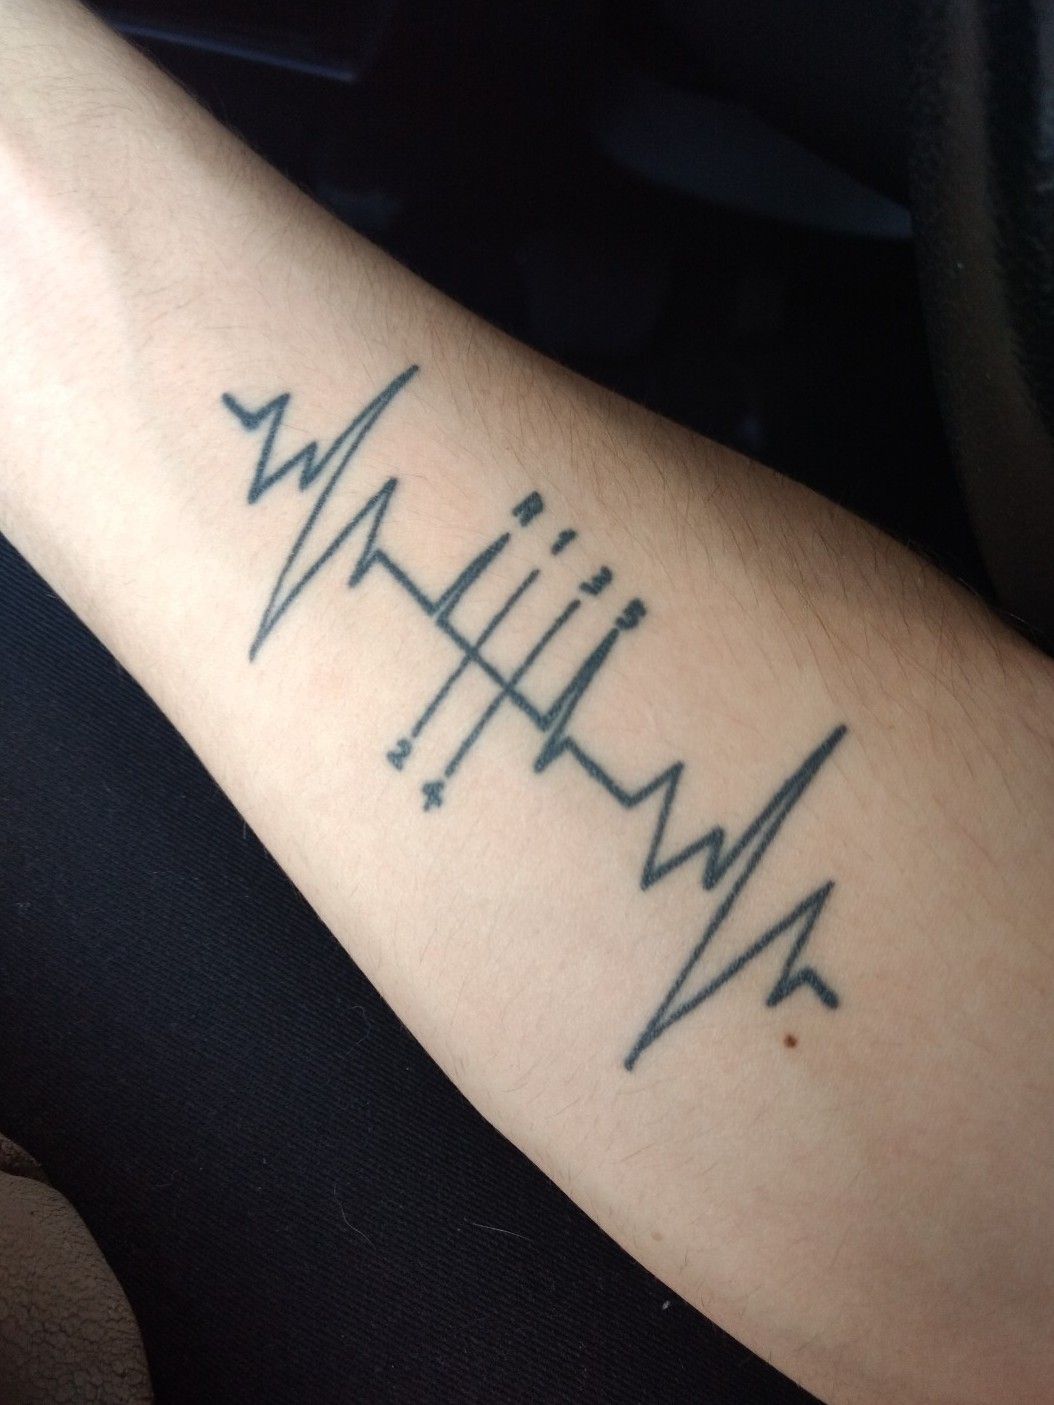 This Hgate Stick Shift Pattern Tattoo Went Viral For The Wrong Reason   SHOUTS